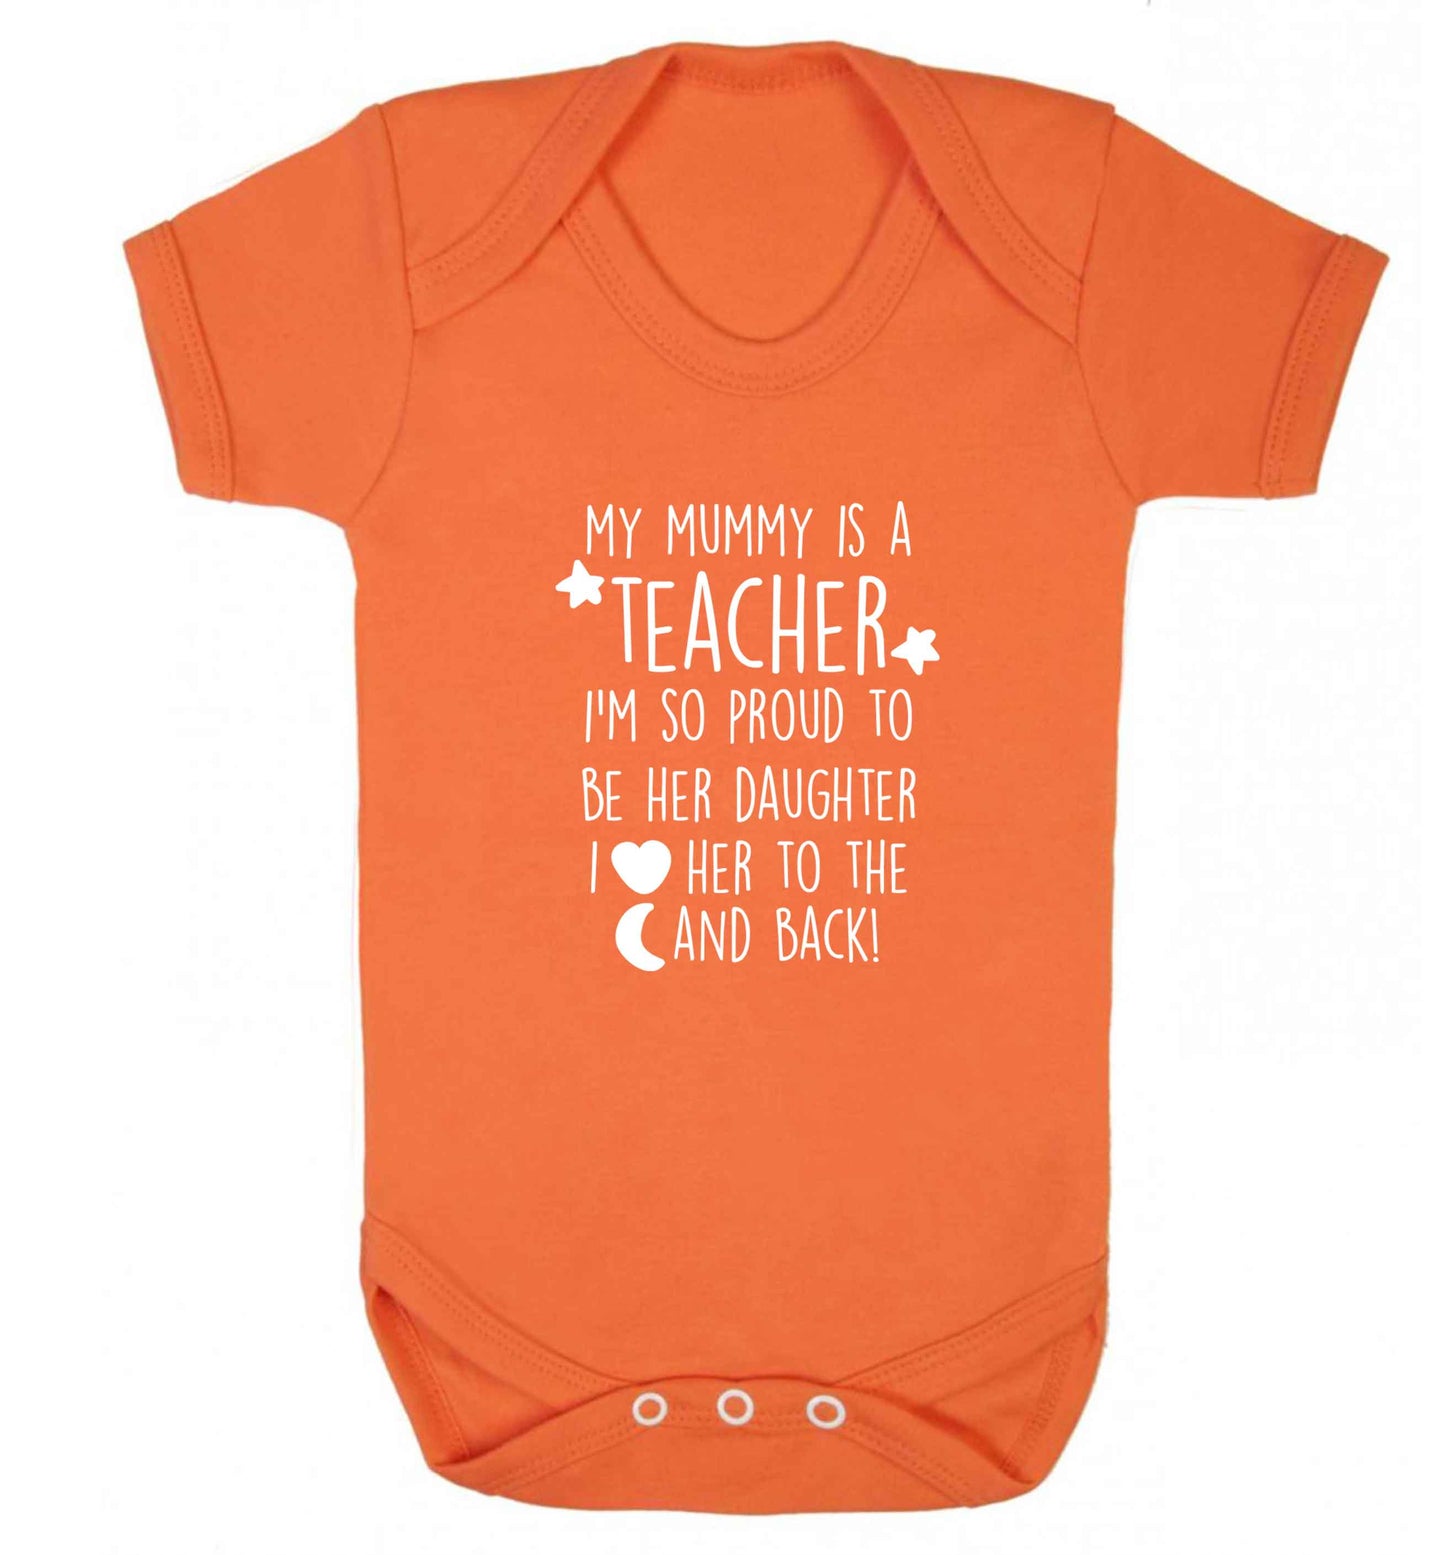 My mummy is a teacher I'm so proud to be her daughter I love her to the moon and back baby vest orange 18-24 months